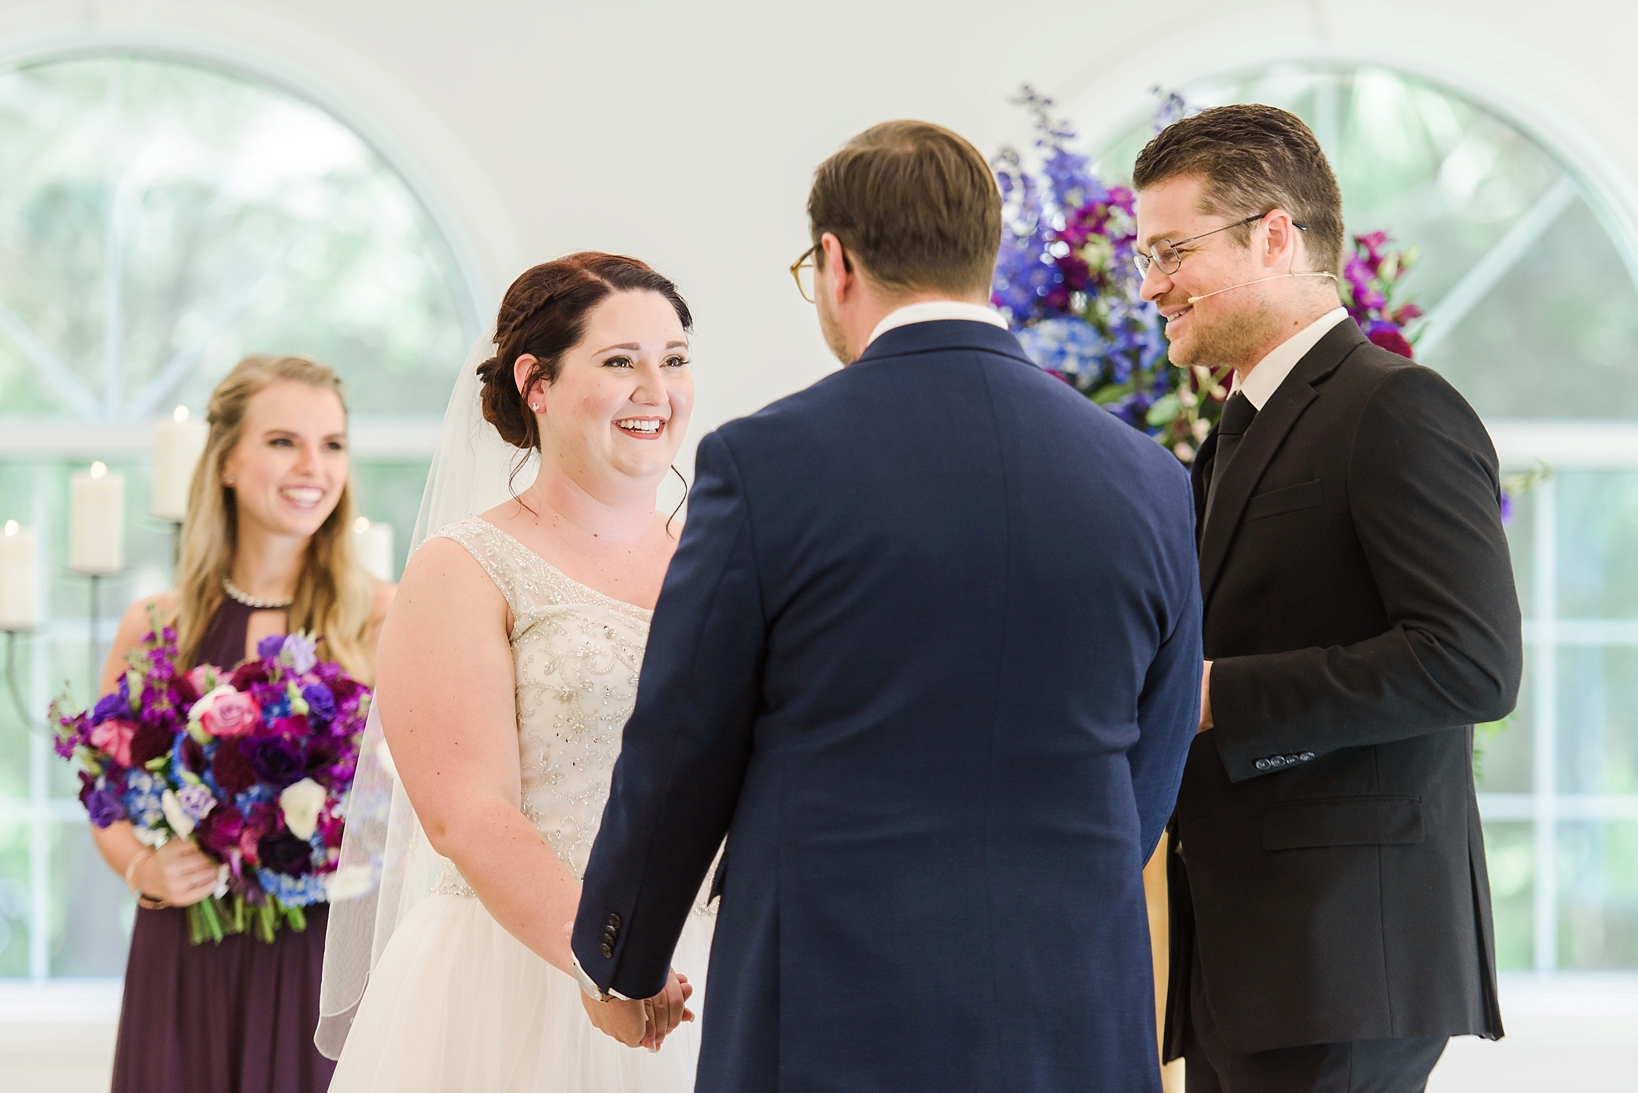 Bride and groom smiling at each other while they exchange vows by Sarah & Ben Photography